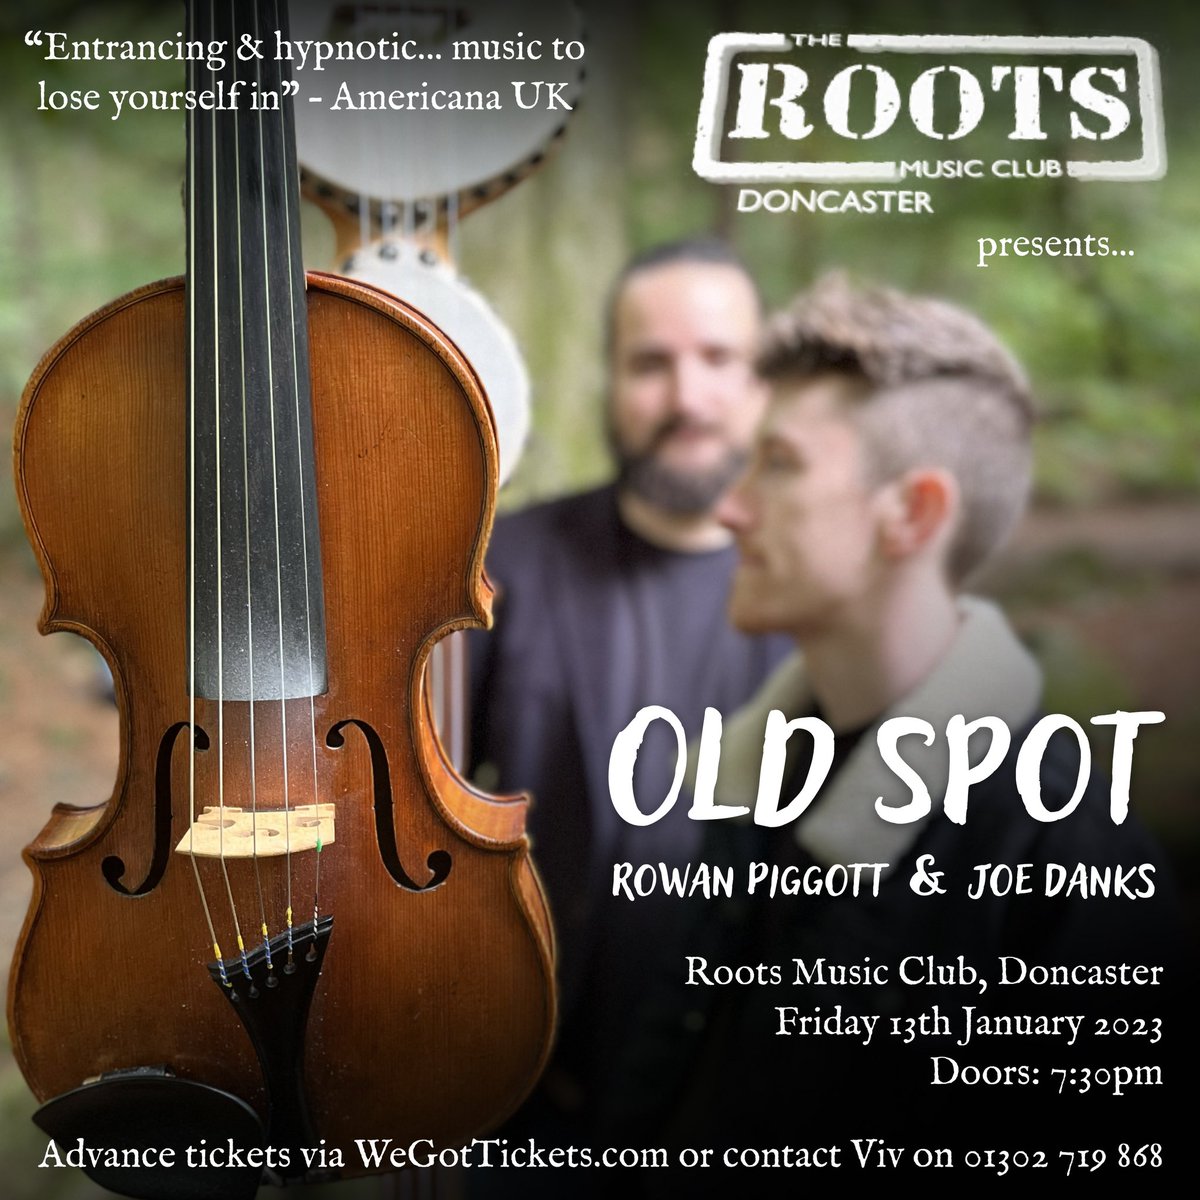 13th January at @rootsmusicclub in Doncaster! Tickets are available from WeGotTickets or from the phone number below. wegottickets.com/event/565448

#oldtimemusic #oldtime #doncaster #whatsondoncaster #whatsonyorkshire #southyorkshire #folkmusic #fiddle #banjo #folk #folkgig